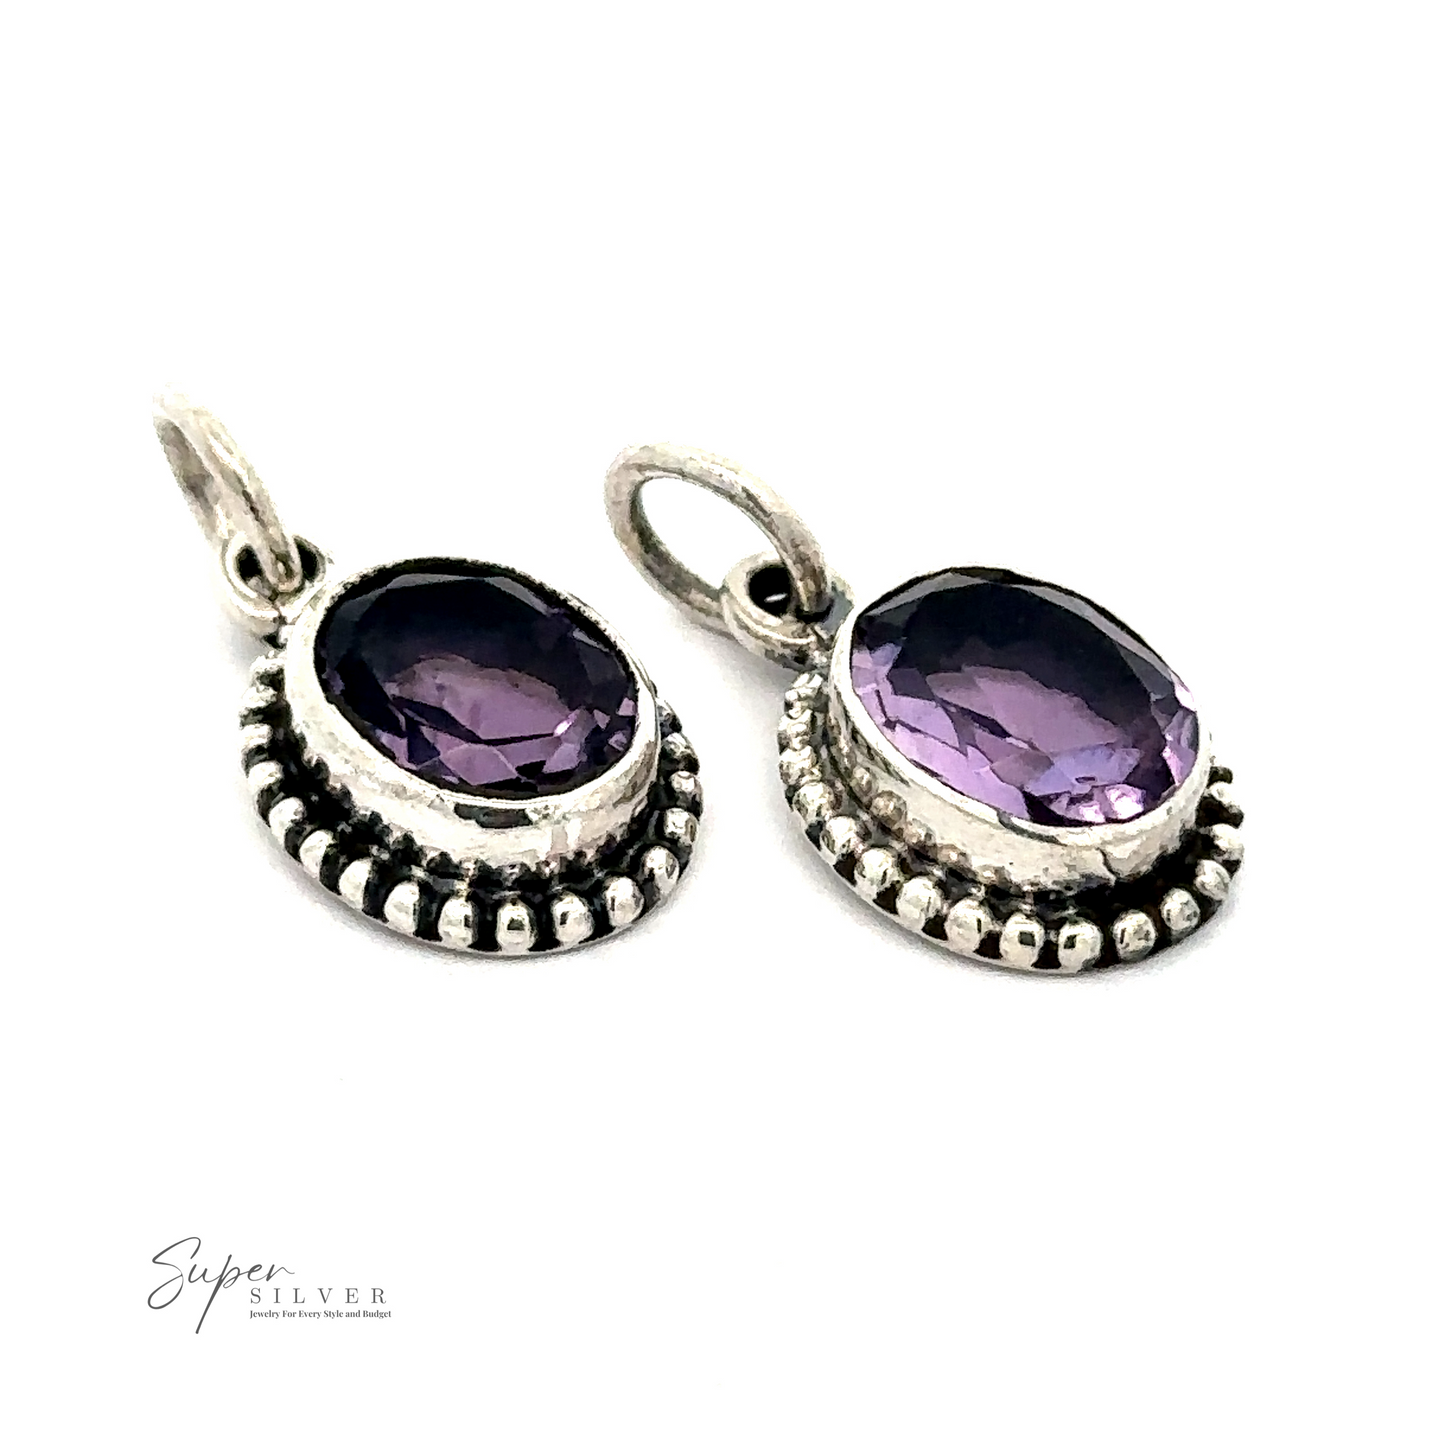 
                  
                    Two oval-shaped sterling silver pendants with soothing purple gemstones and intricate beadwork around the edges. The word "Oval Faceted Amethyst Pendant" is visible in the bottom left corner.
                  
                